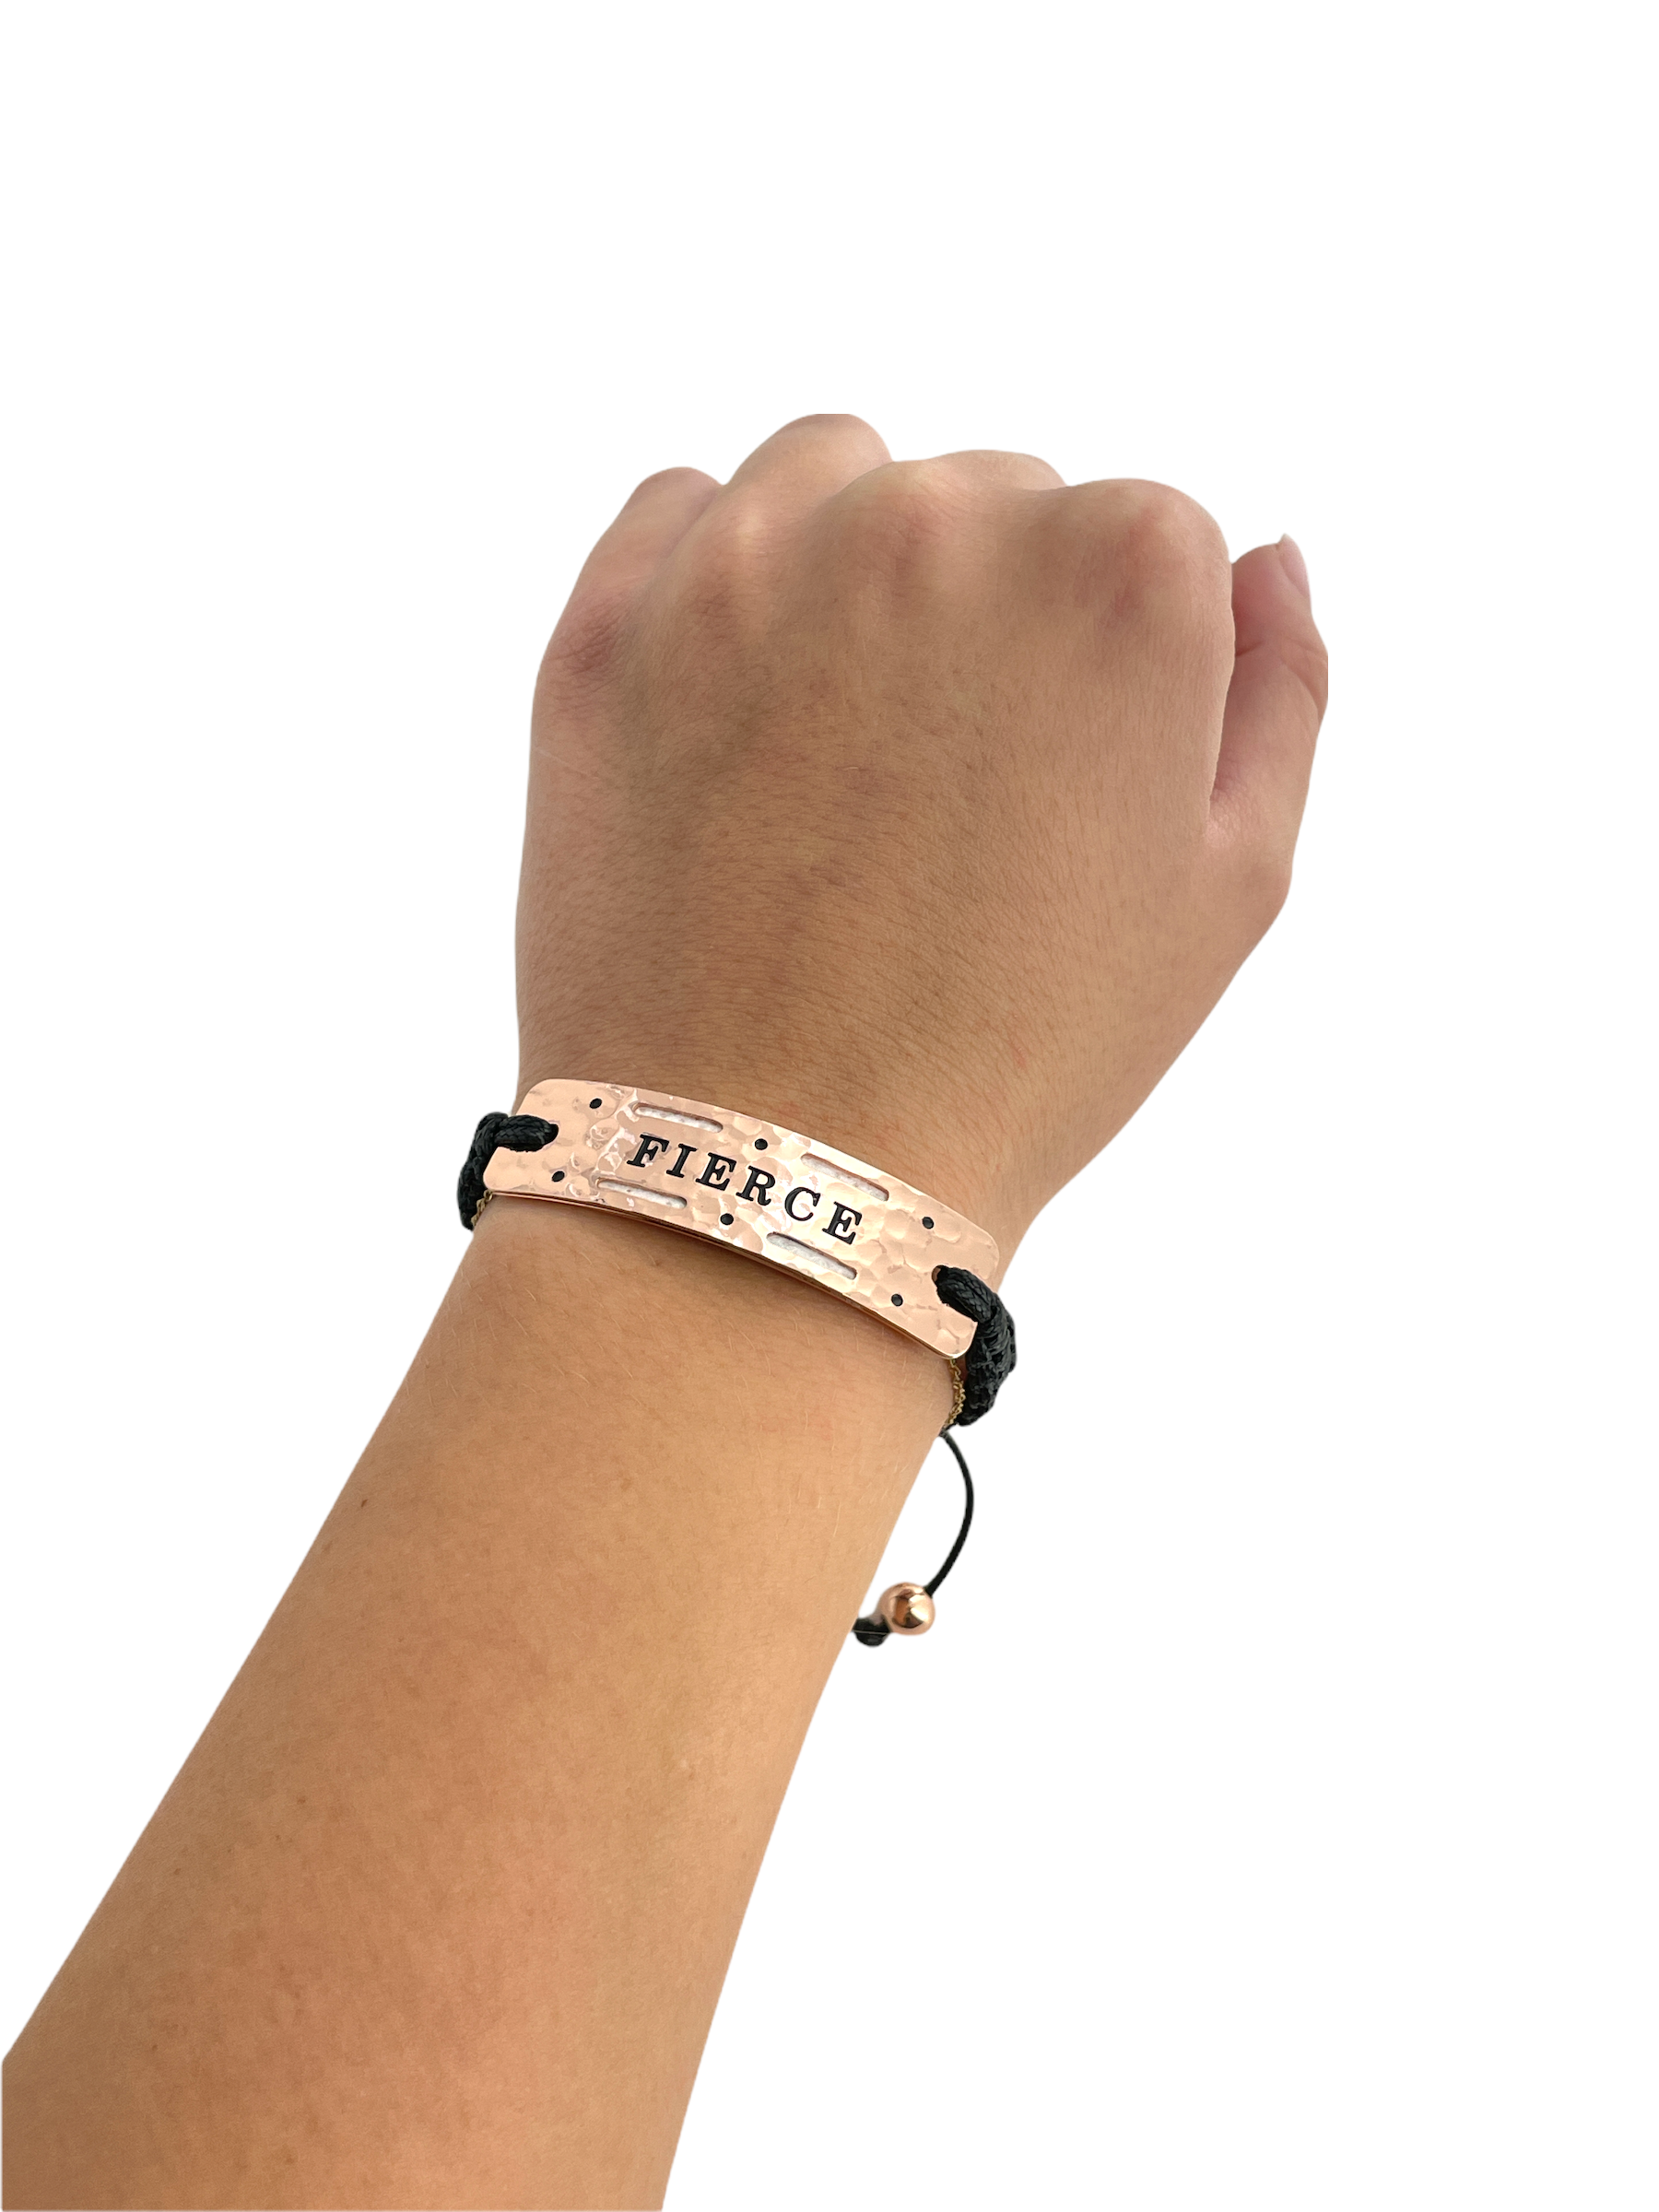 Fierce  - Vented Power Word Aromatherapy Diffuser Bracelet